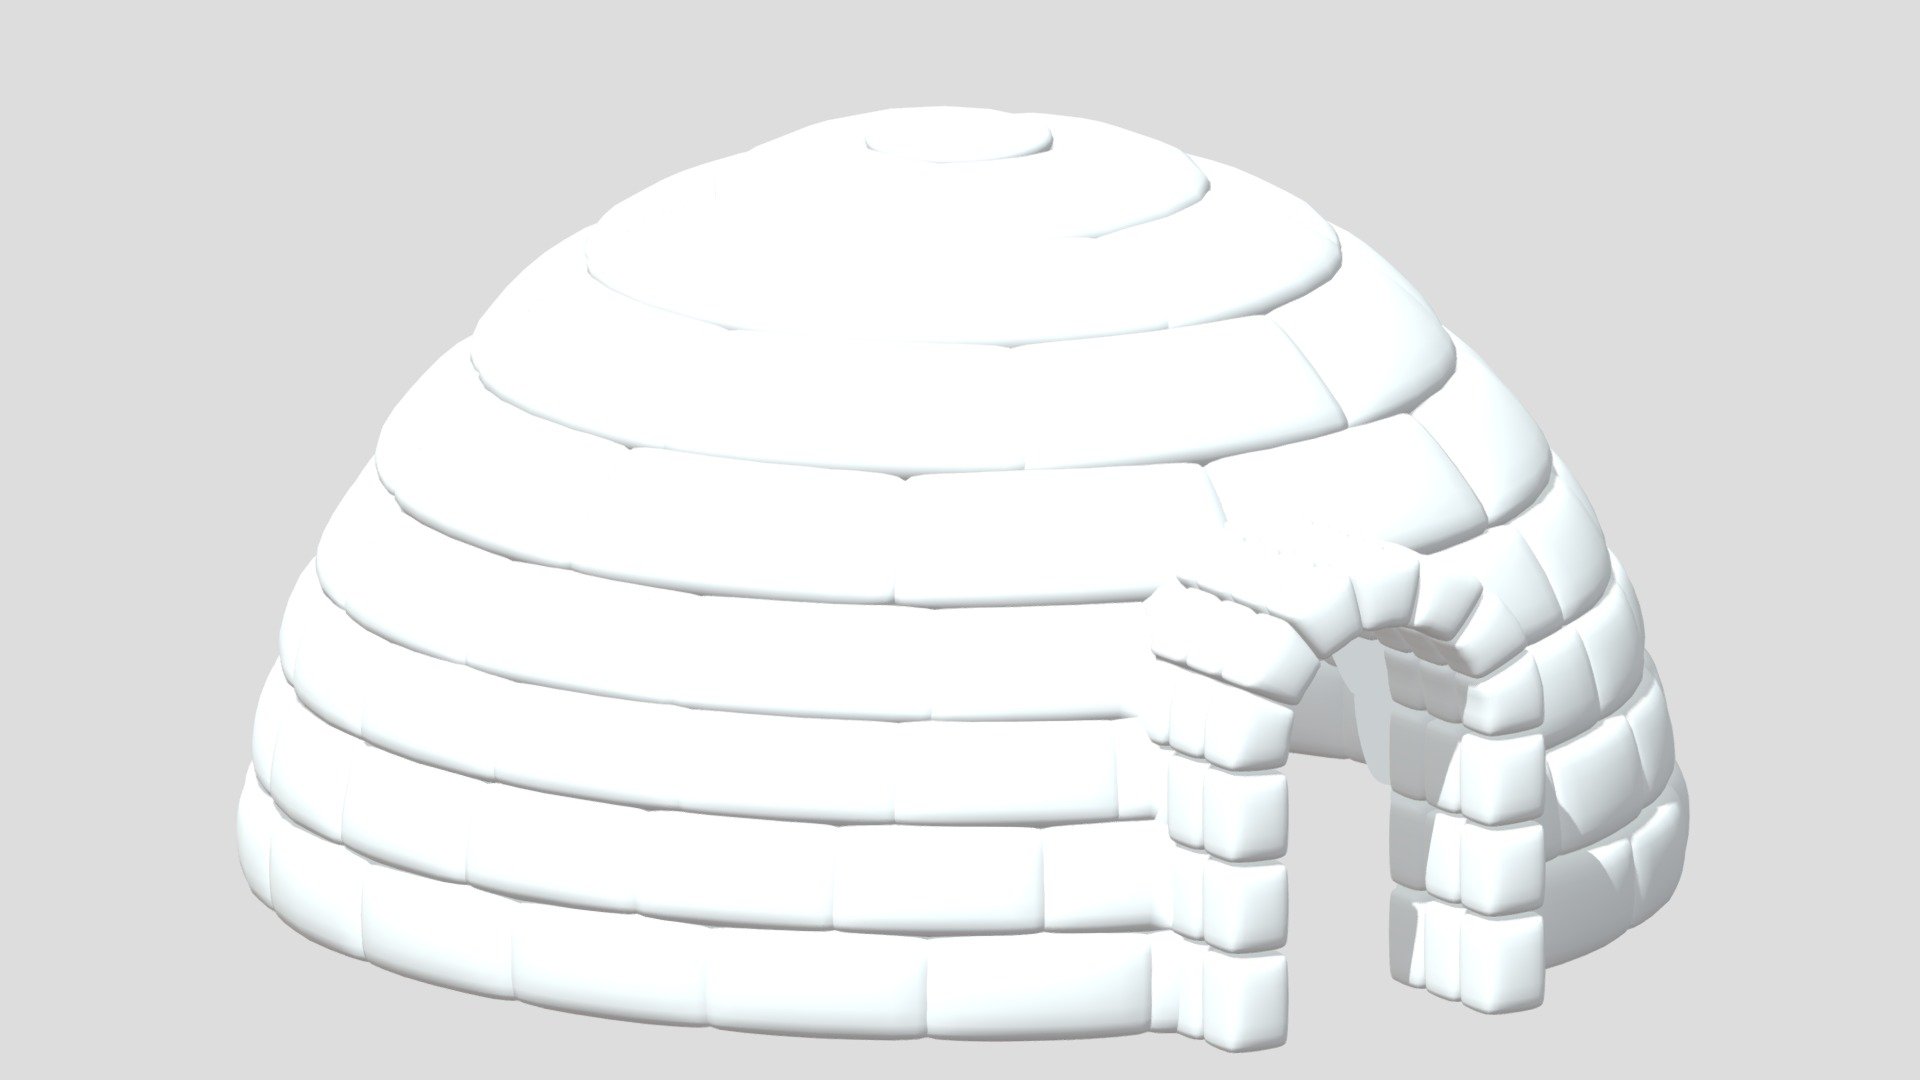 -Cartoon Igloo Canada 1.

-This product contains 10 objects.

-Total vert: 55,362 poly: 54,922.

-This product was created in Blender 2.935.

-Formats: blend, fbx, obj, c4d, dae, abc, stl, glb, unity.

-We hope you enjoy this model.

-Thank you 3d model